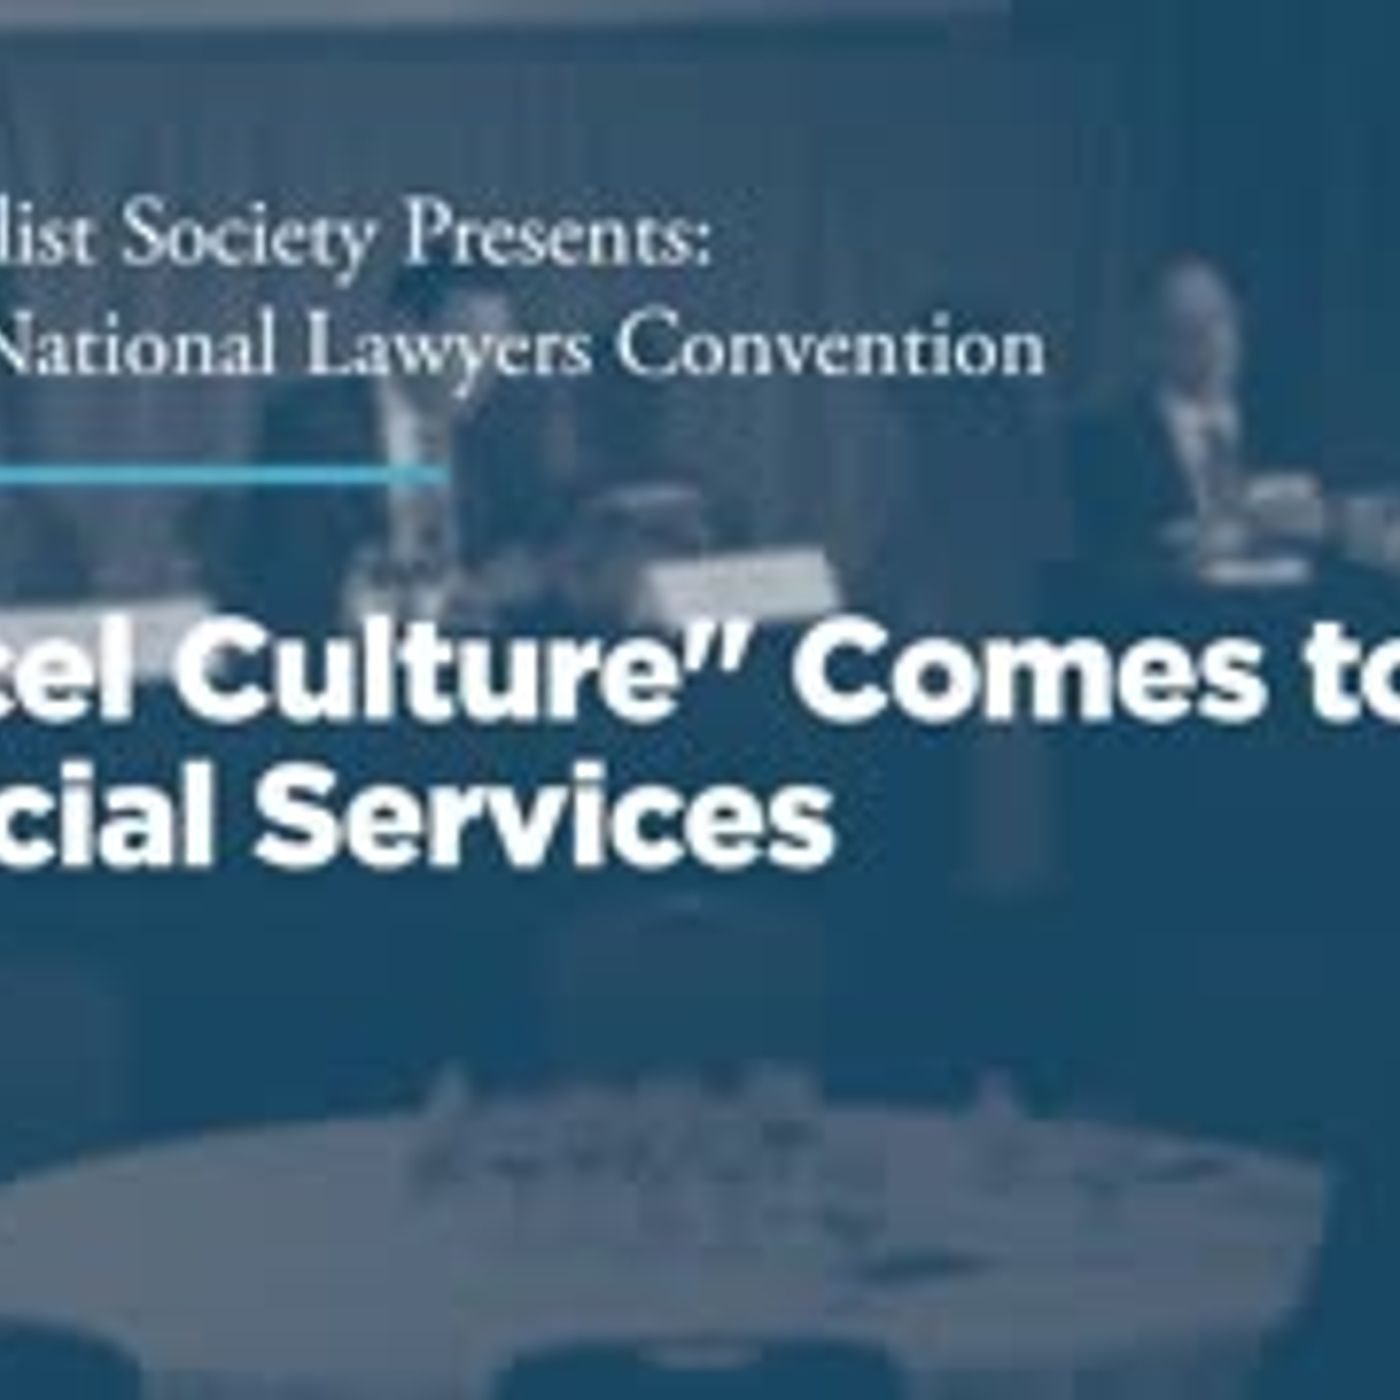 "Cancel Culture" Comes to Financial Services